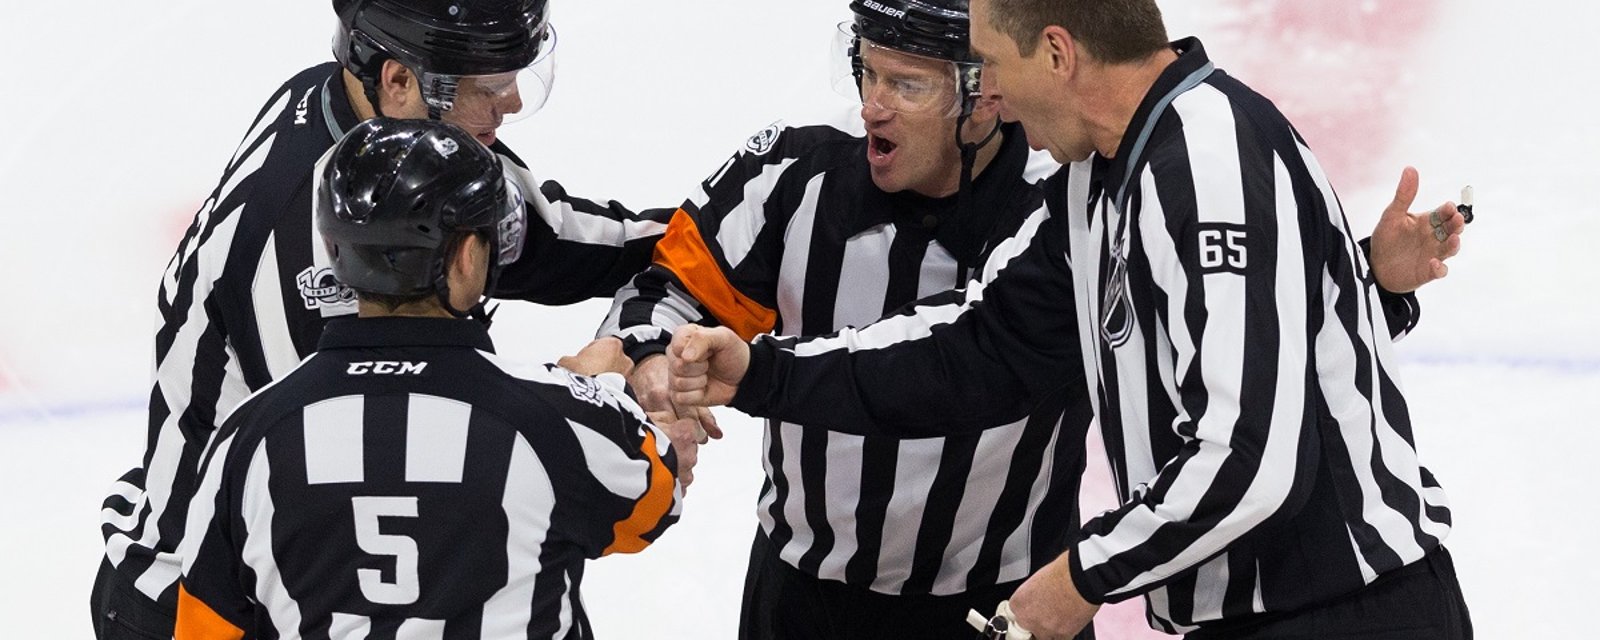 NHL makes a controversial choice of referees for Game 6.